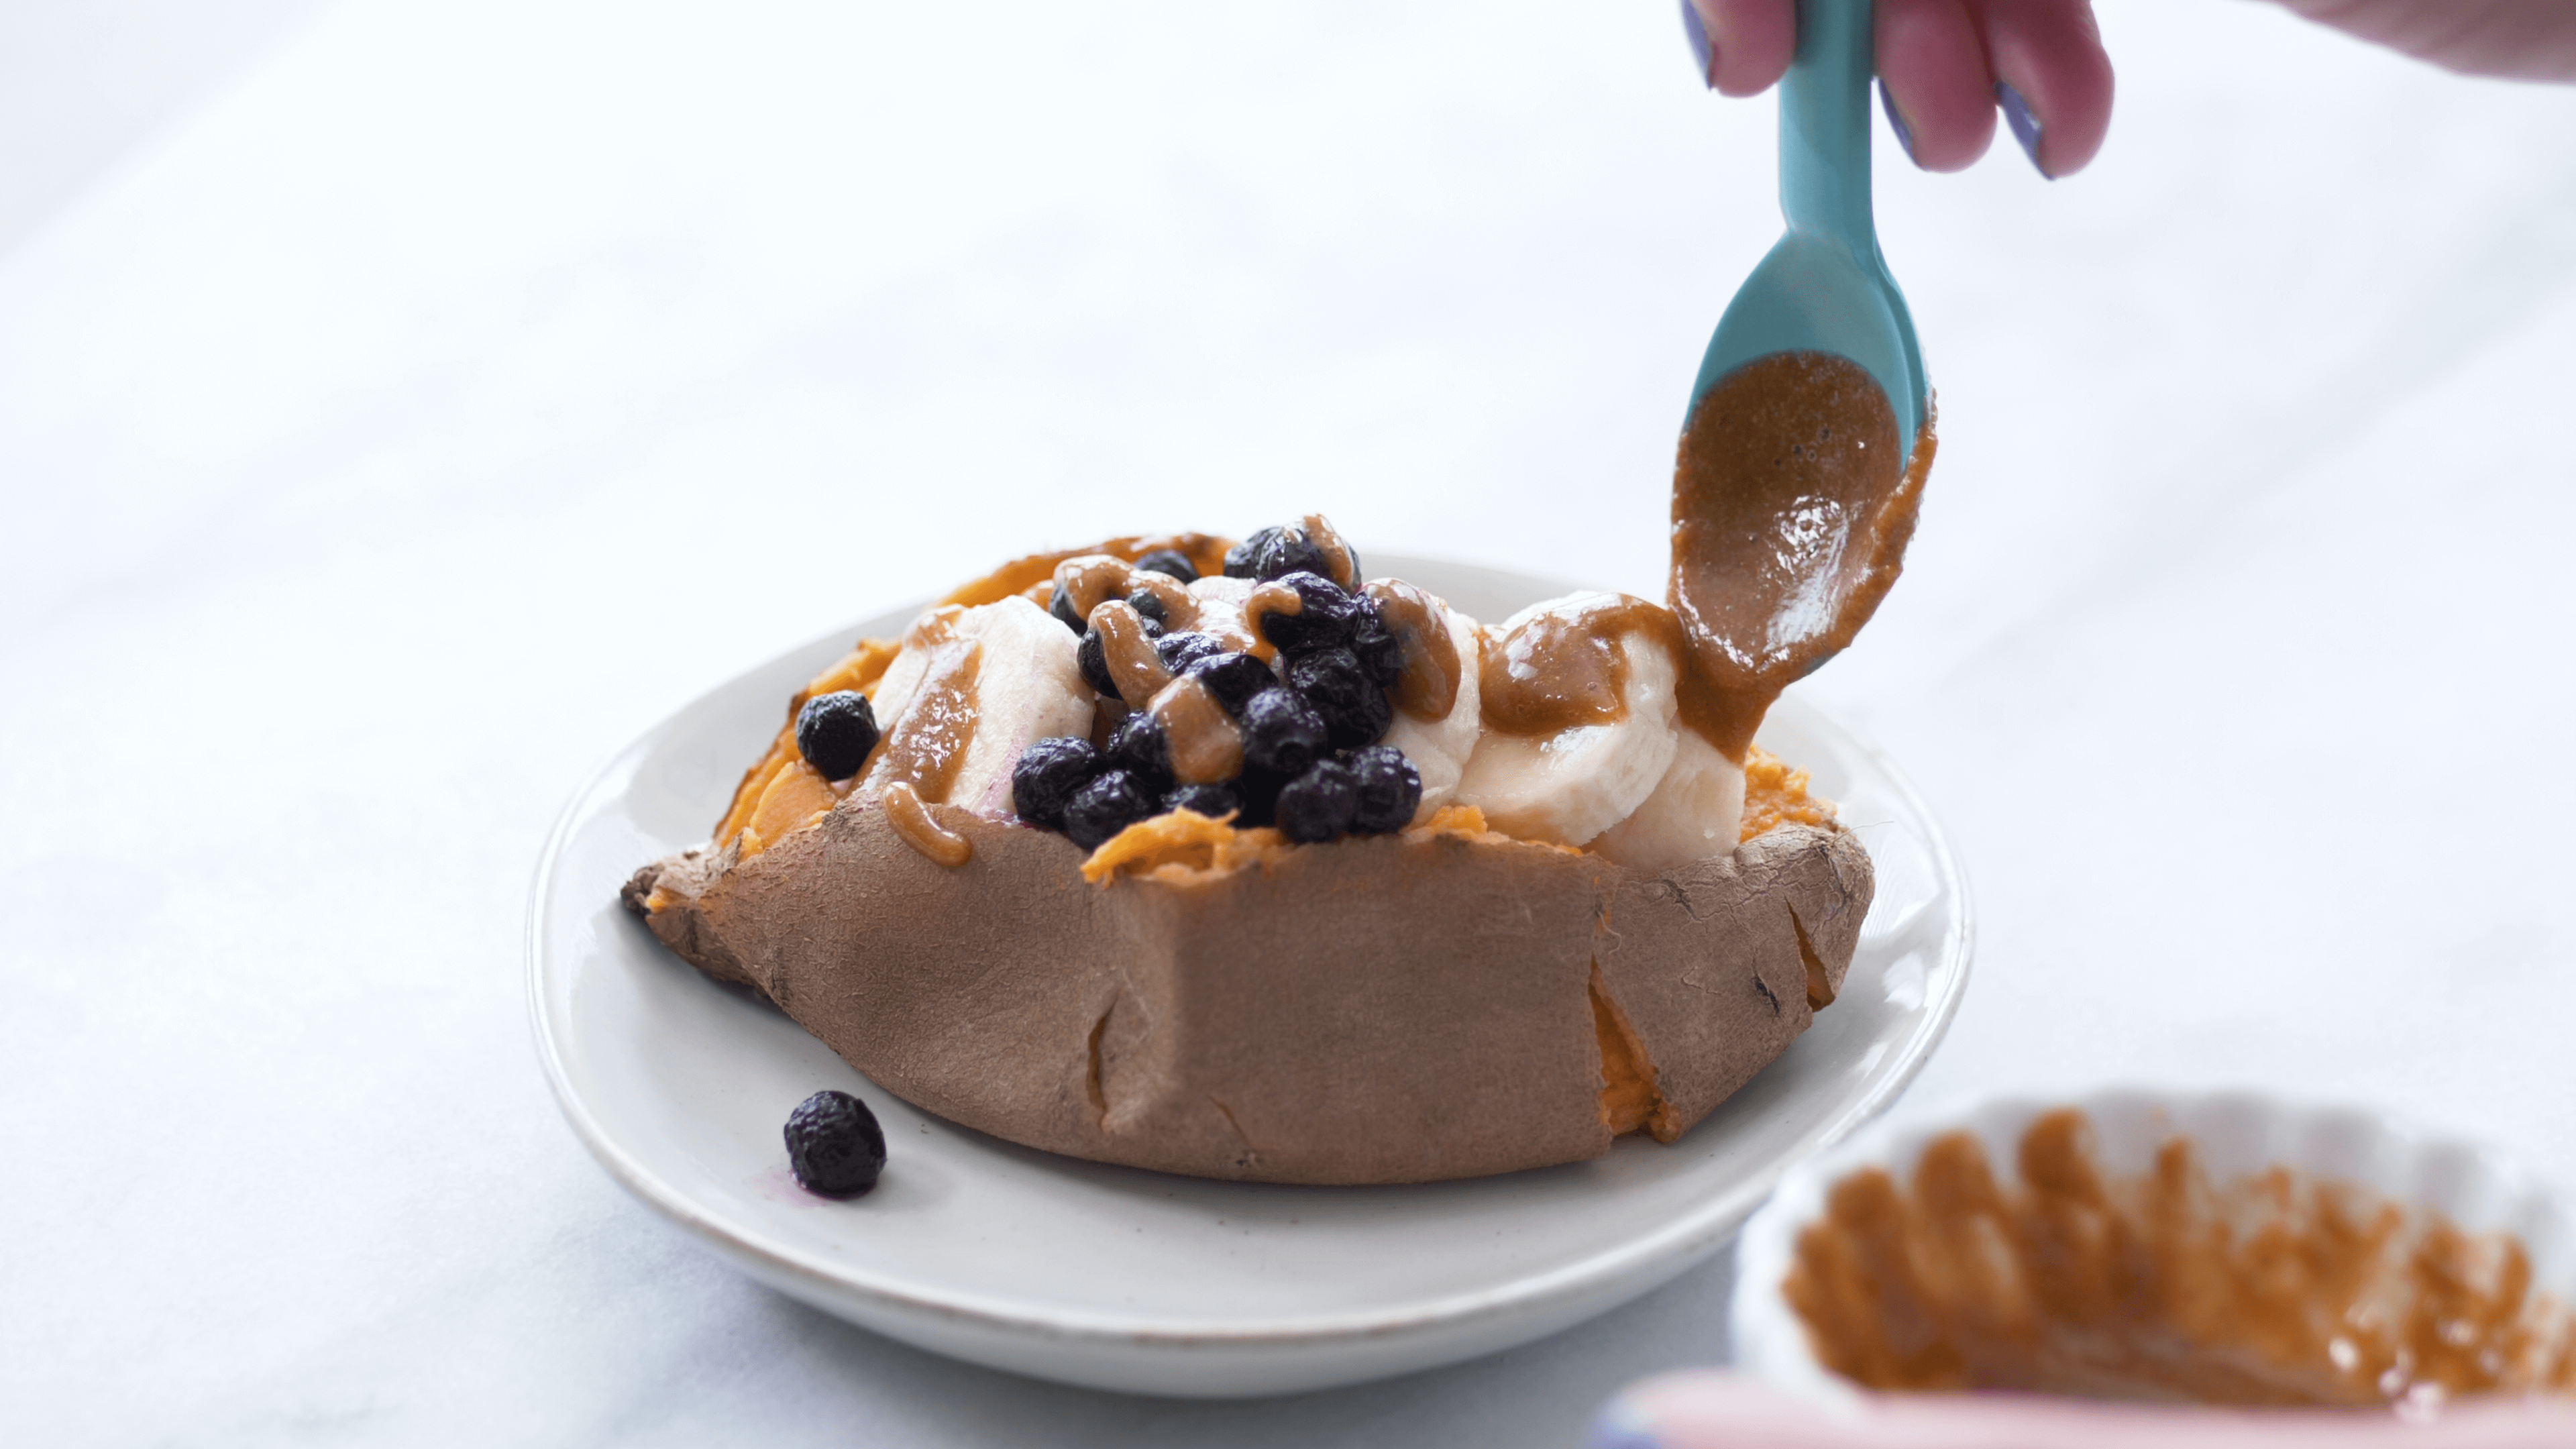 mix together 2 teaspoons of peanut butter with a 2 teaspoons of hot water and a teaspoon of maple syrup. Drizzle thinned peanut butter over sweet potato. With the latest research suggesting early peanut introduction, we've rounded up 8 ways on how to feed peanut butter to baby.